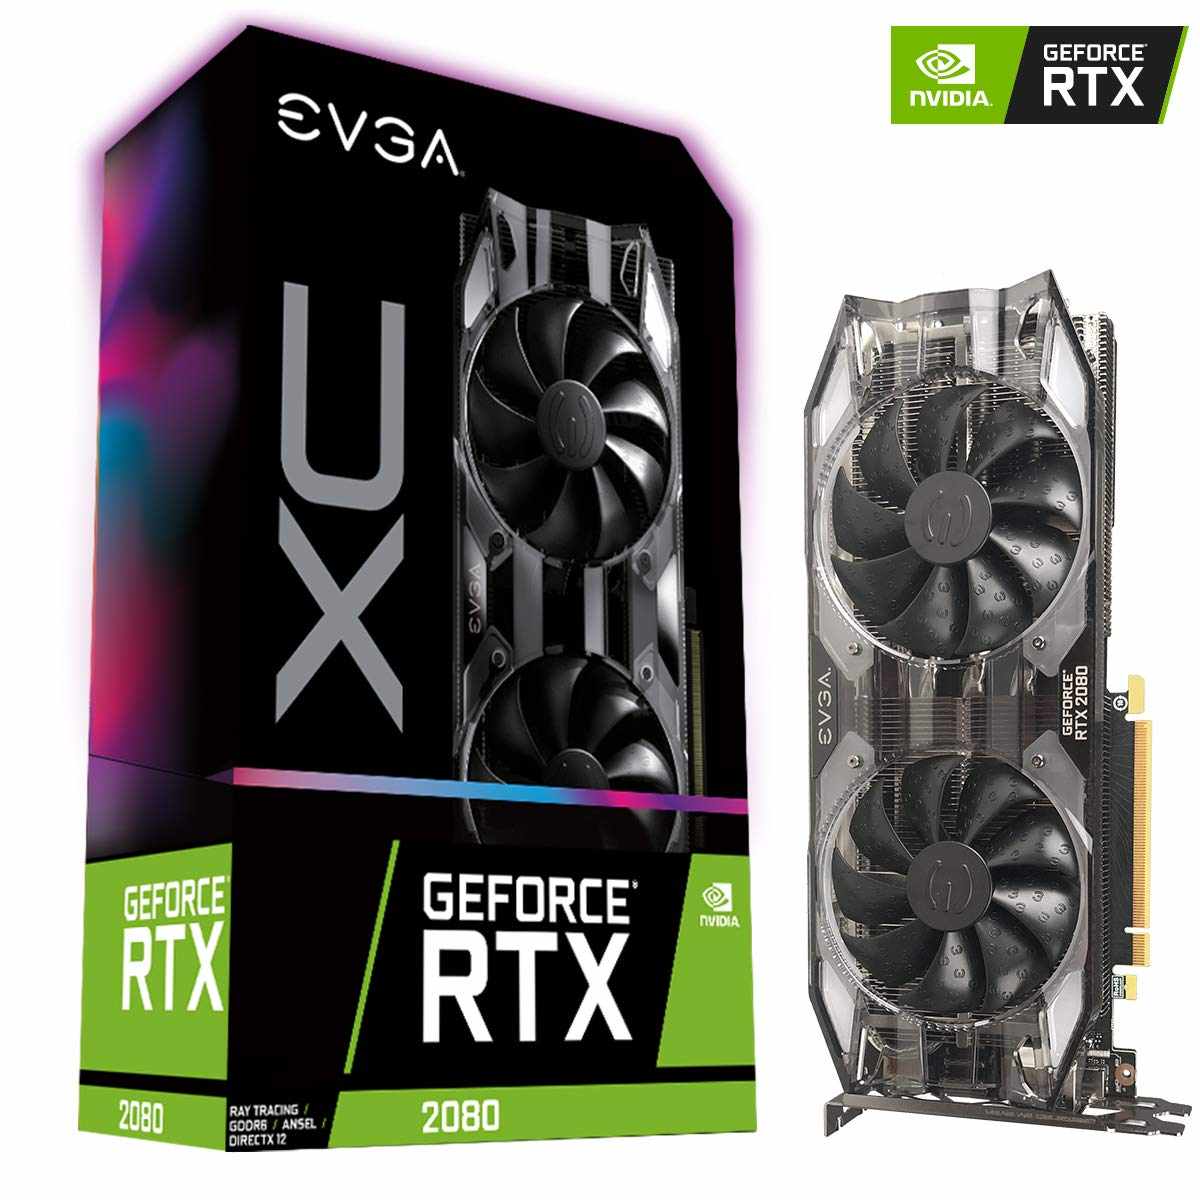 Nvidia GeForce RTX 2080 | Best Graphics Cards For Gaming